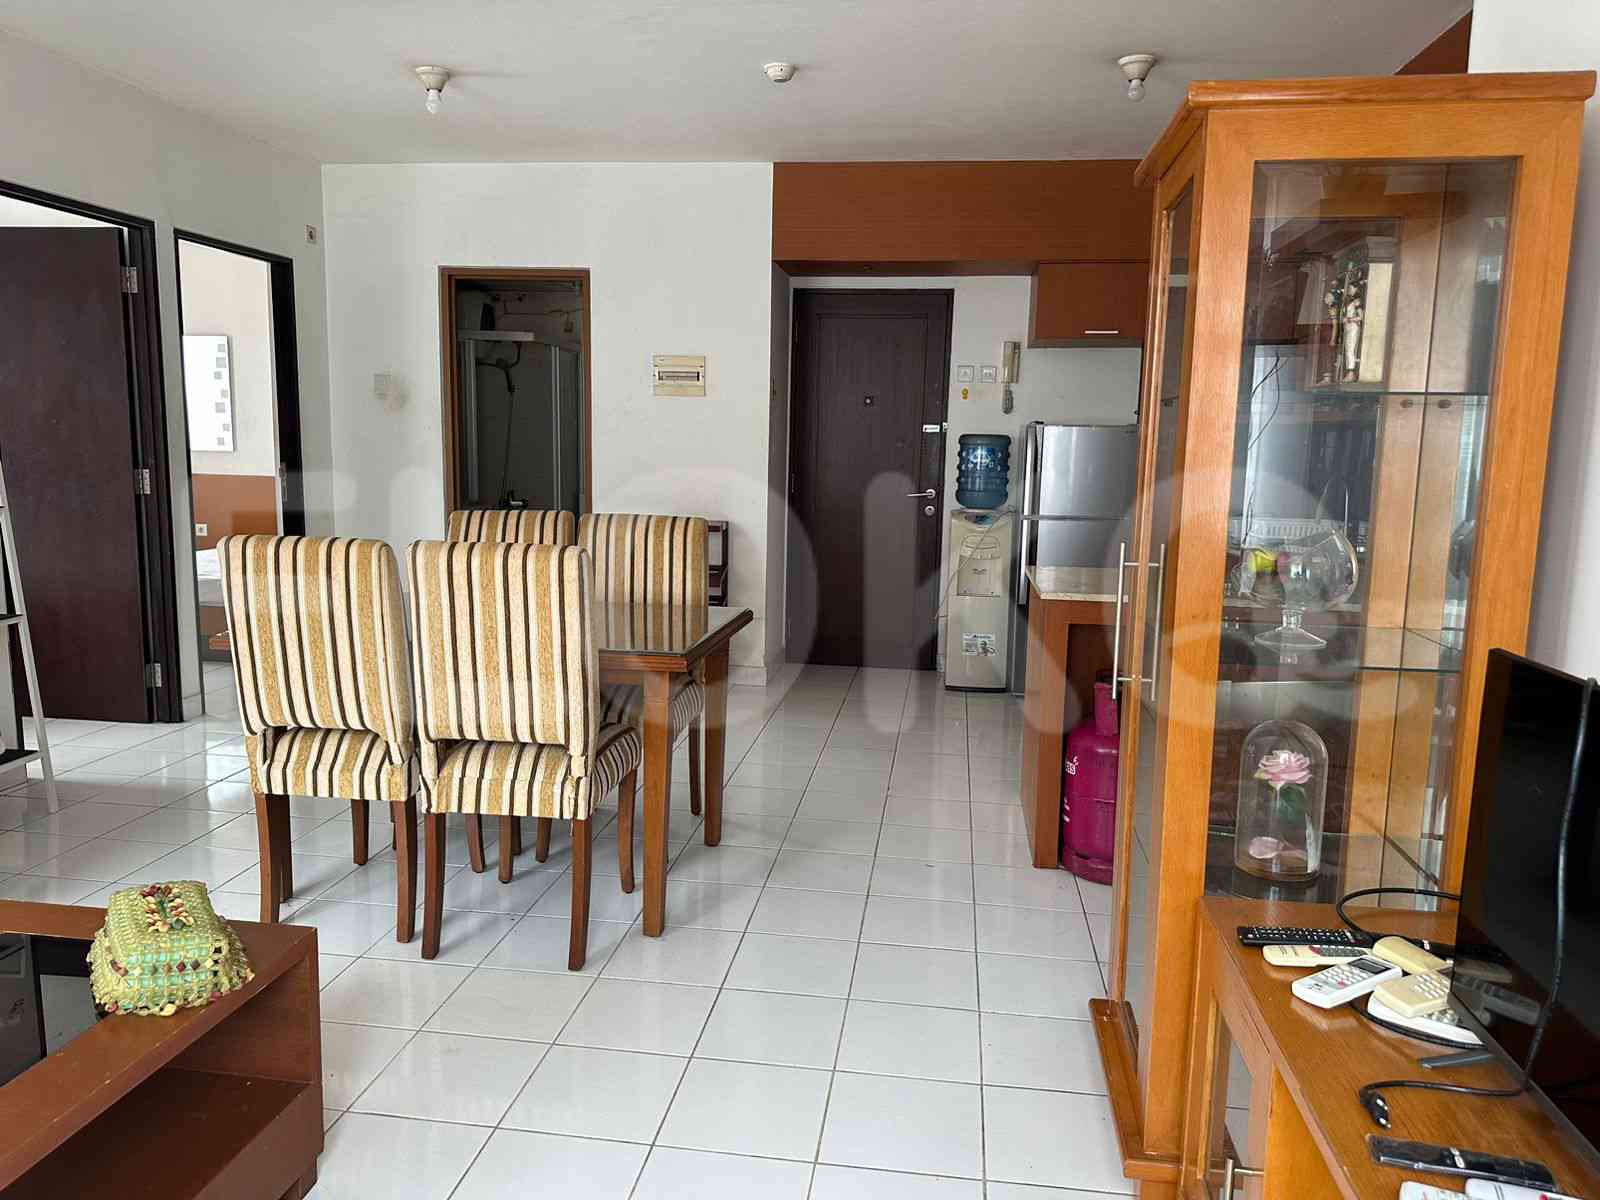 64 sqm, 19th floor, 2 BR apartment for sale in Kuningan 6